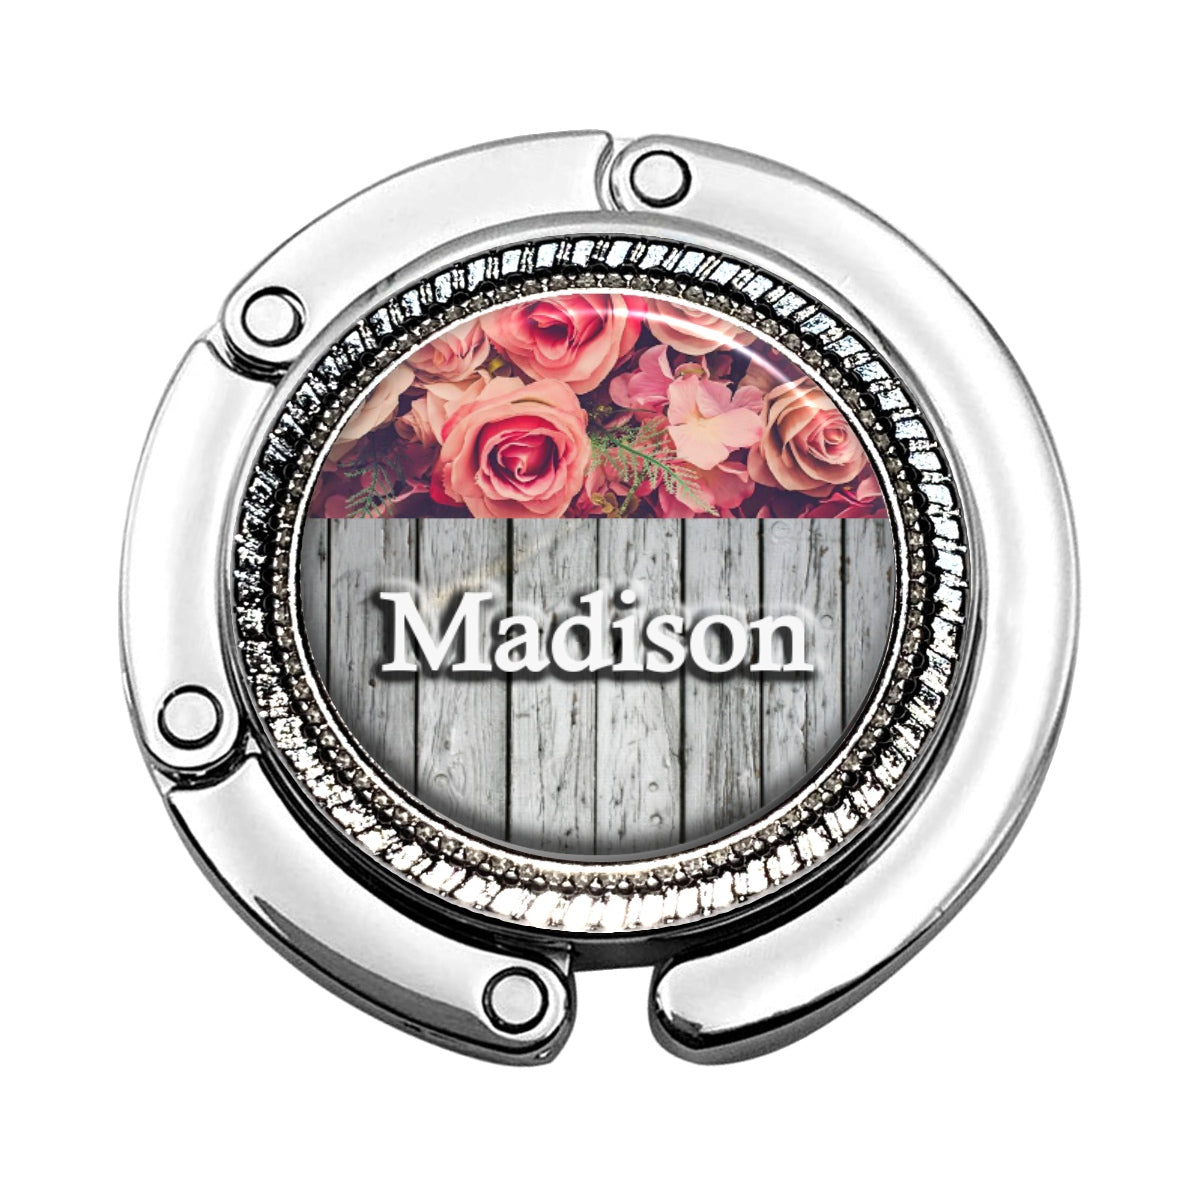 a wooden sign with roses on it that says madison